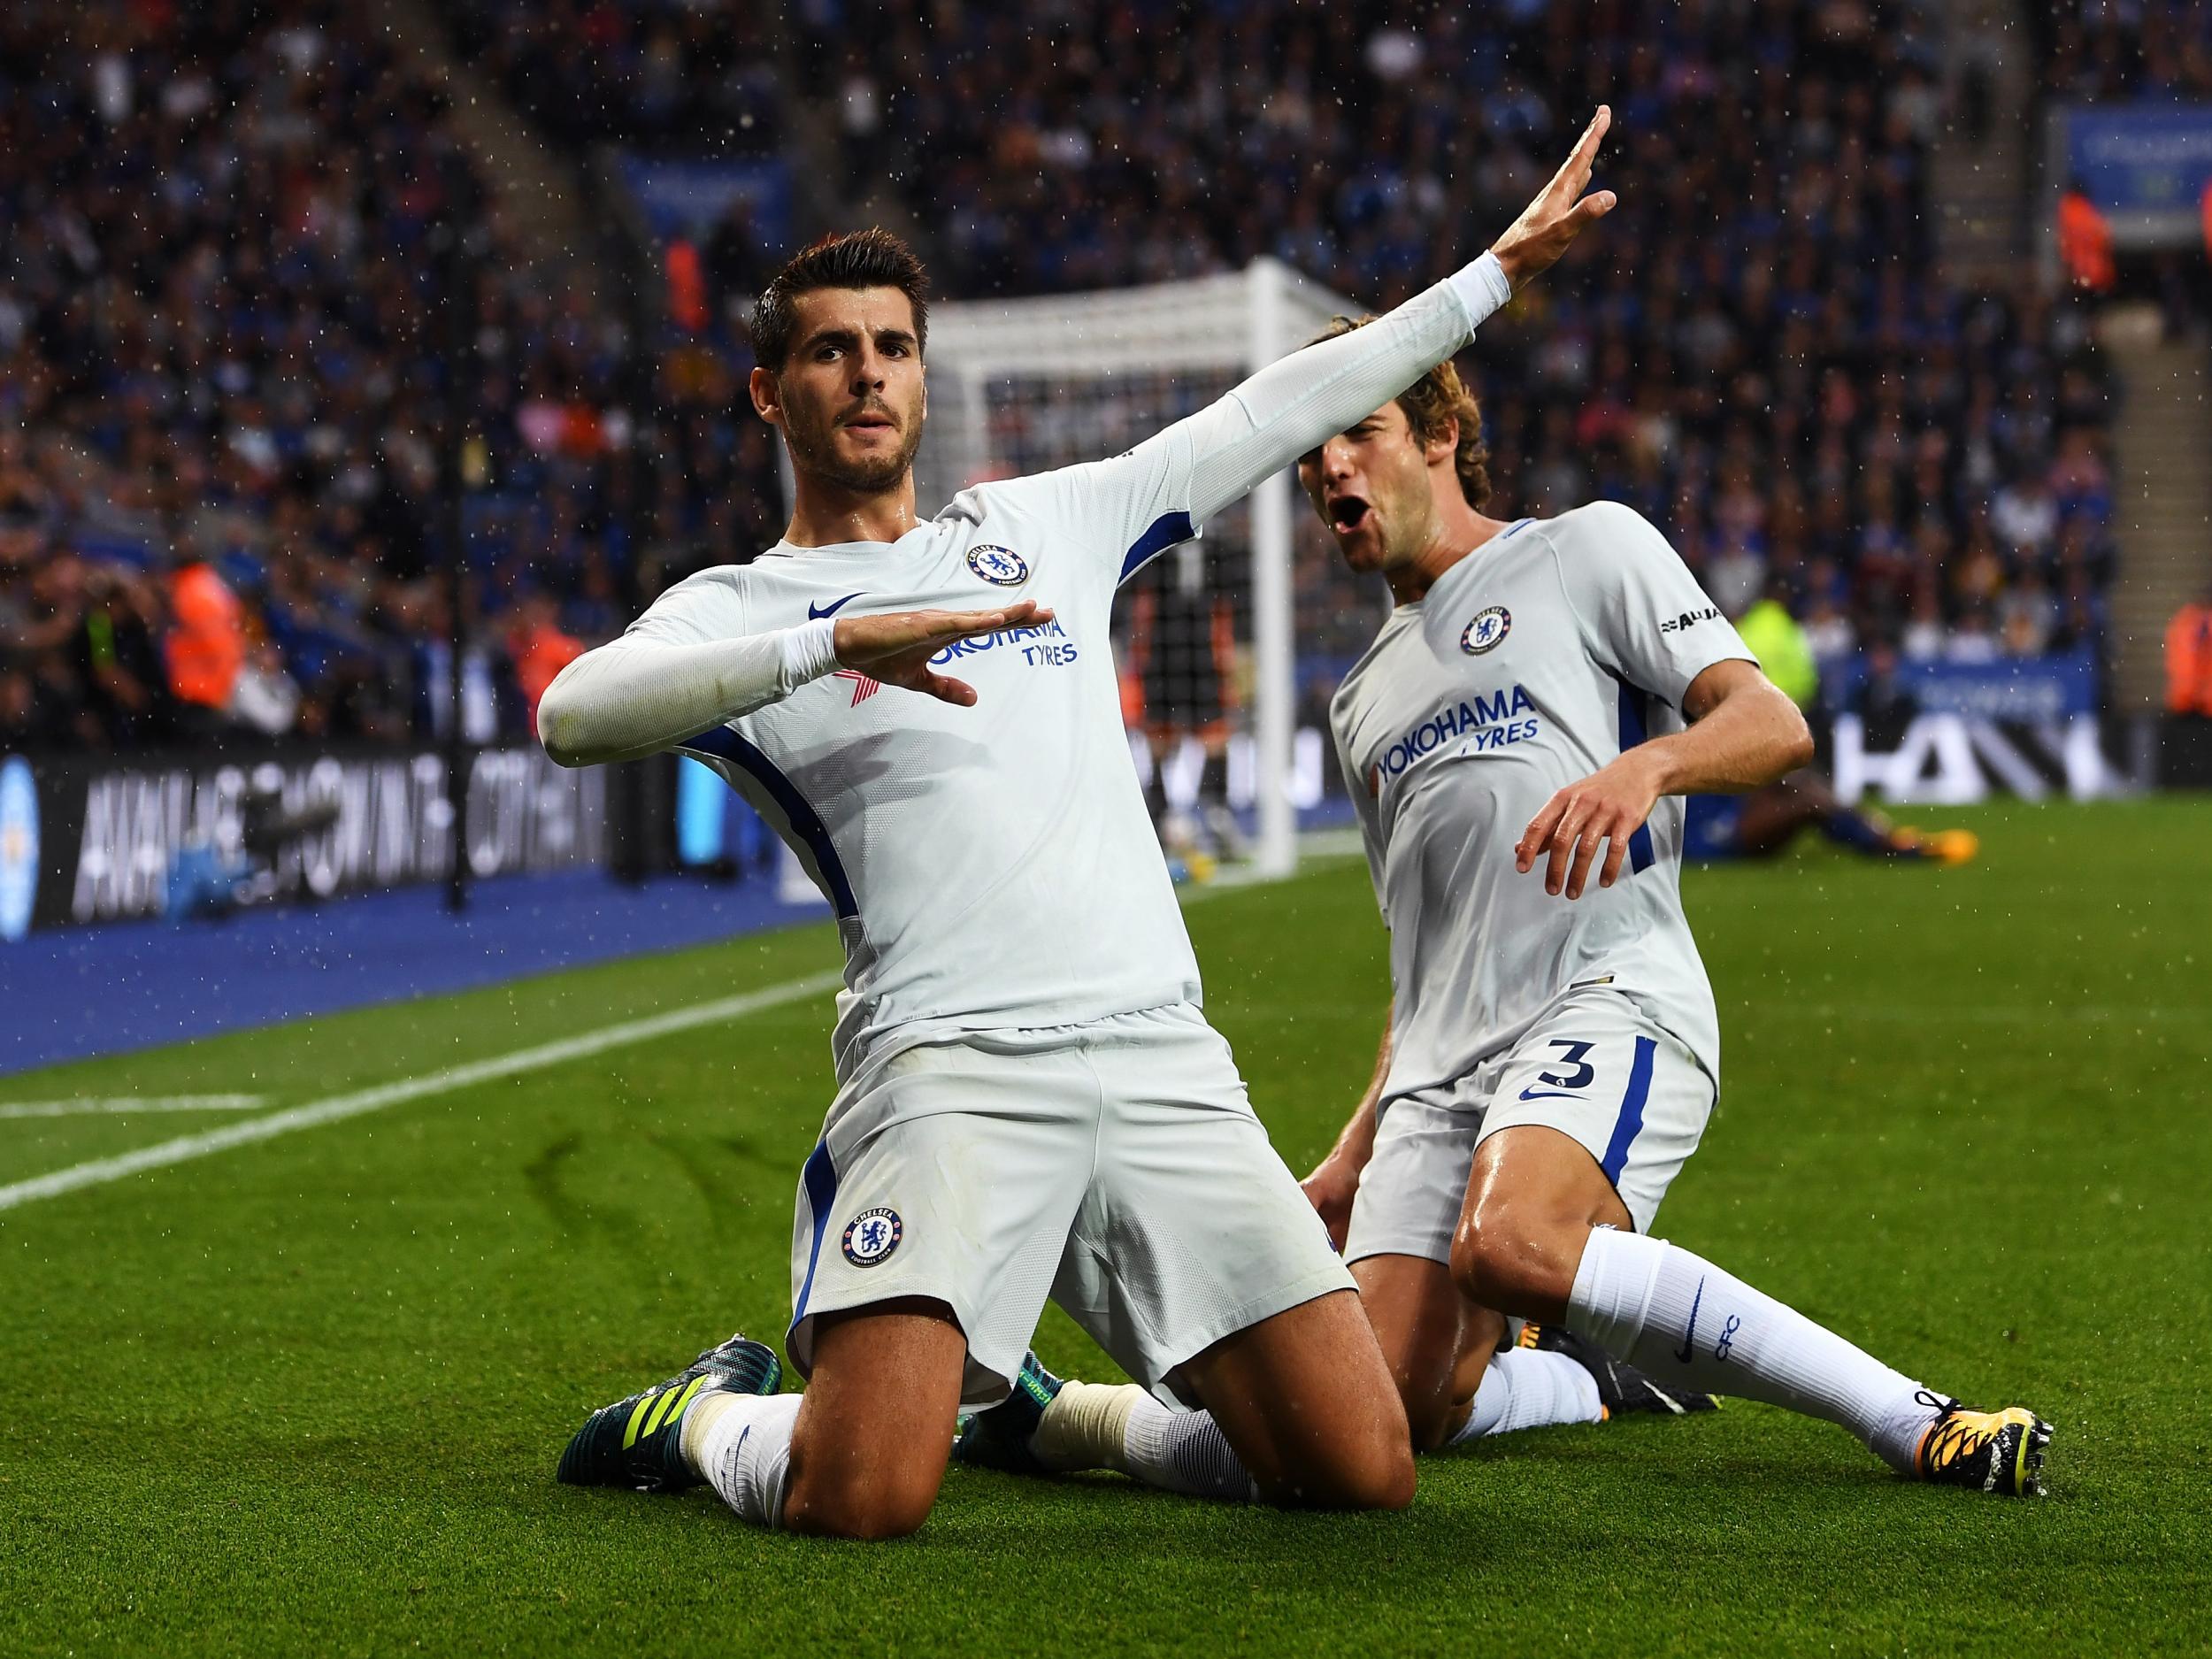 Alvaro Morata has made a strong start to life in the Premier League but needs work